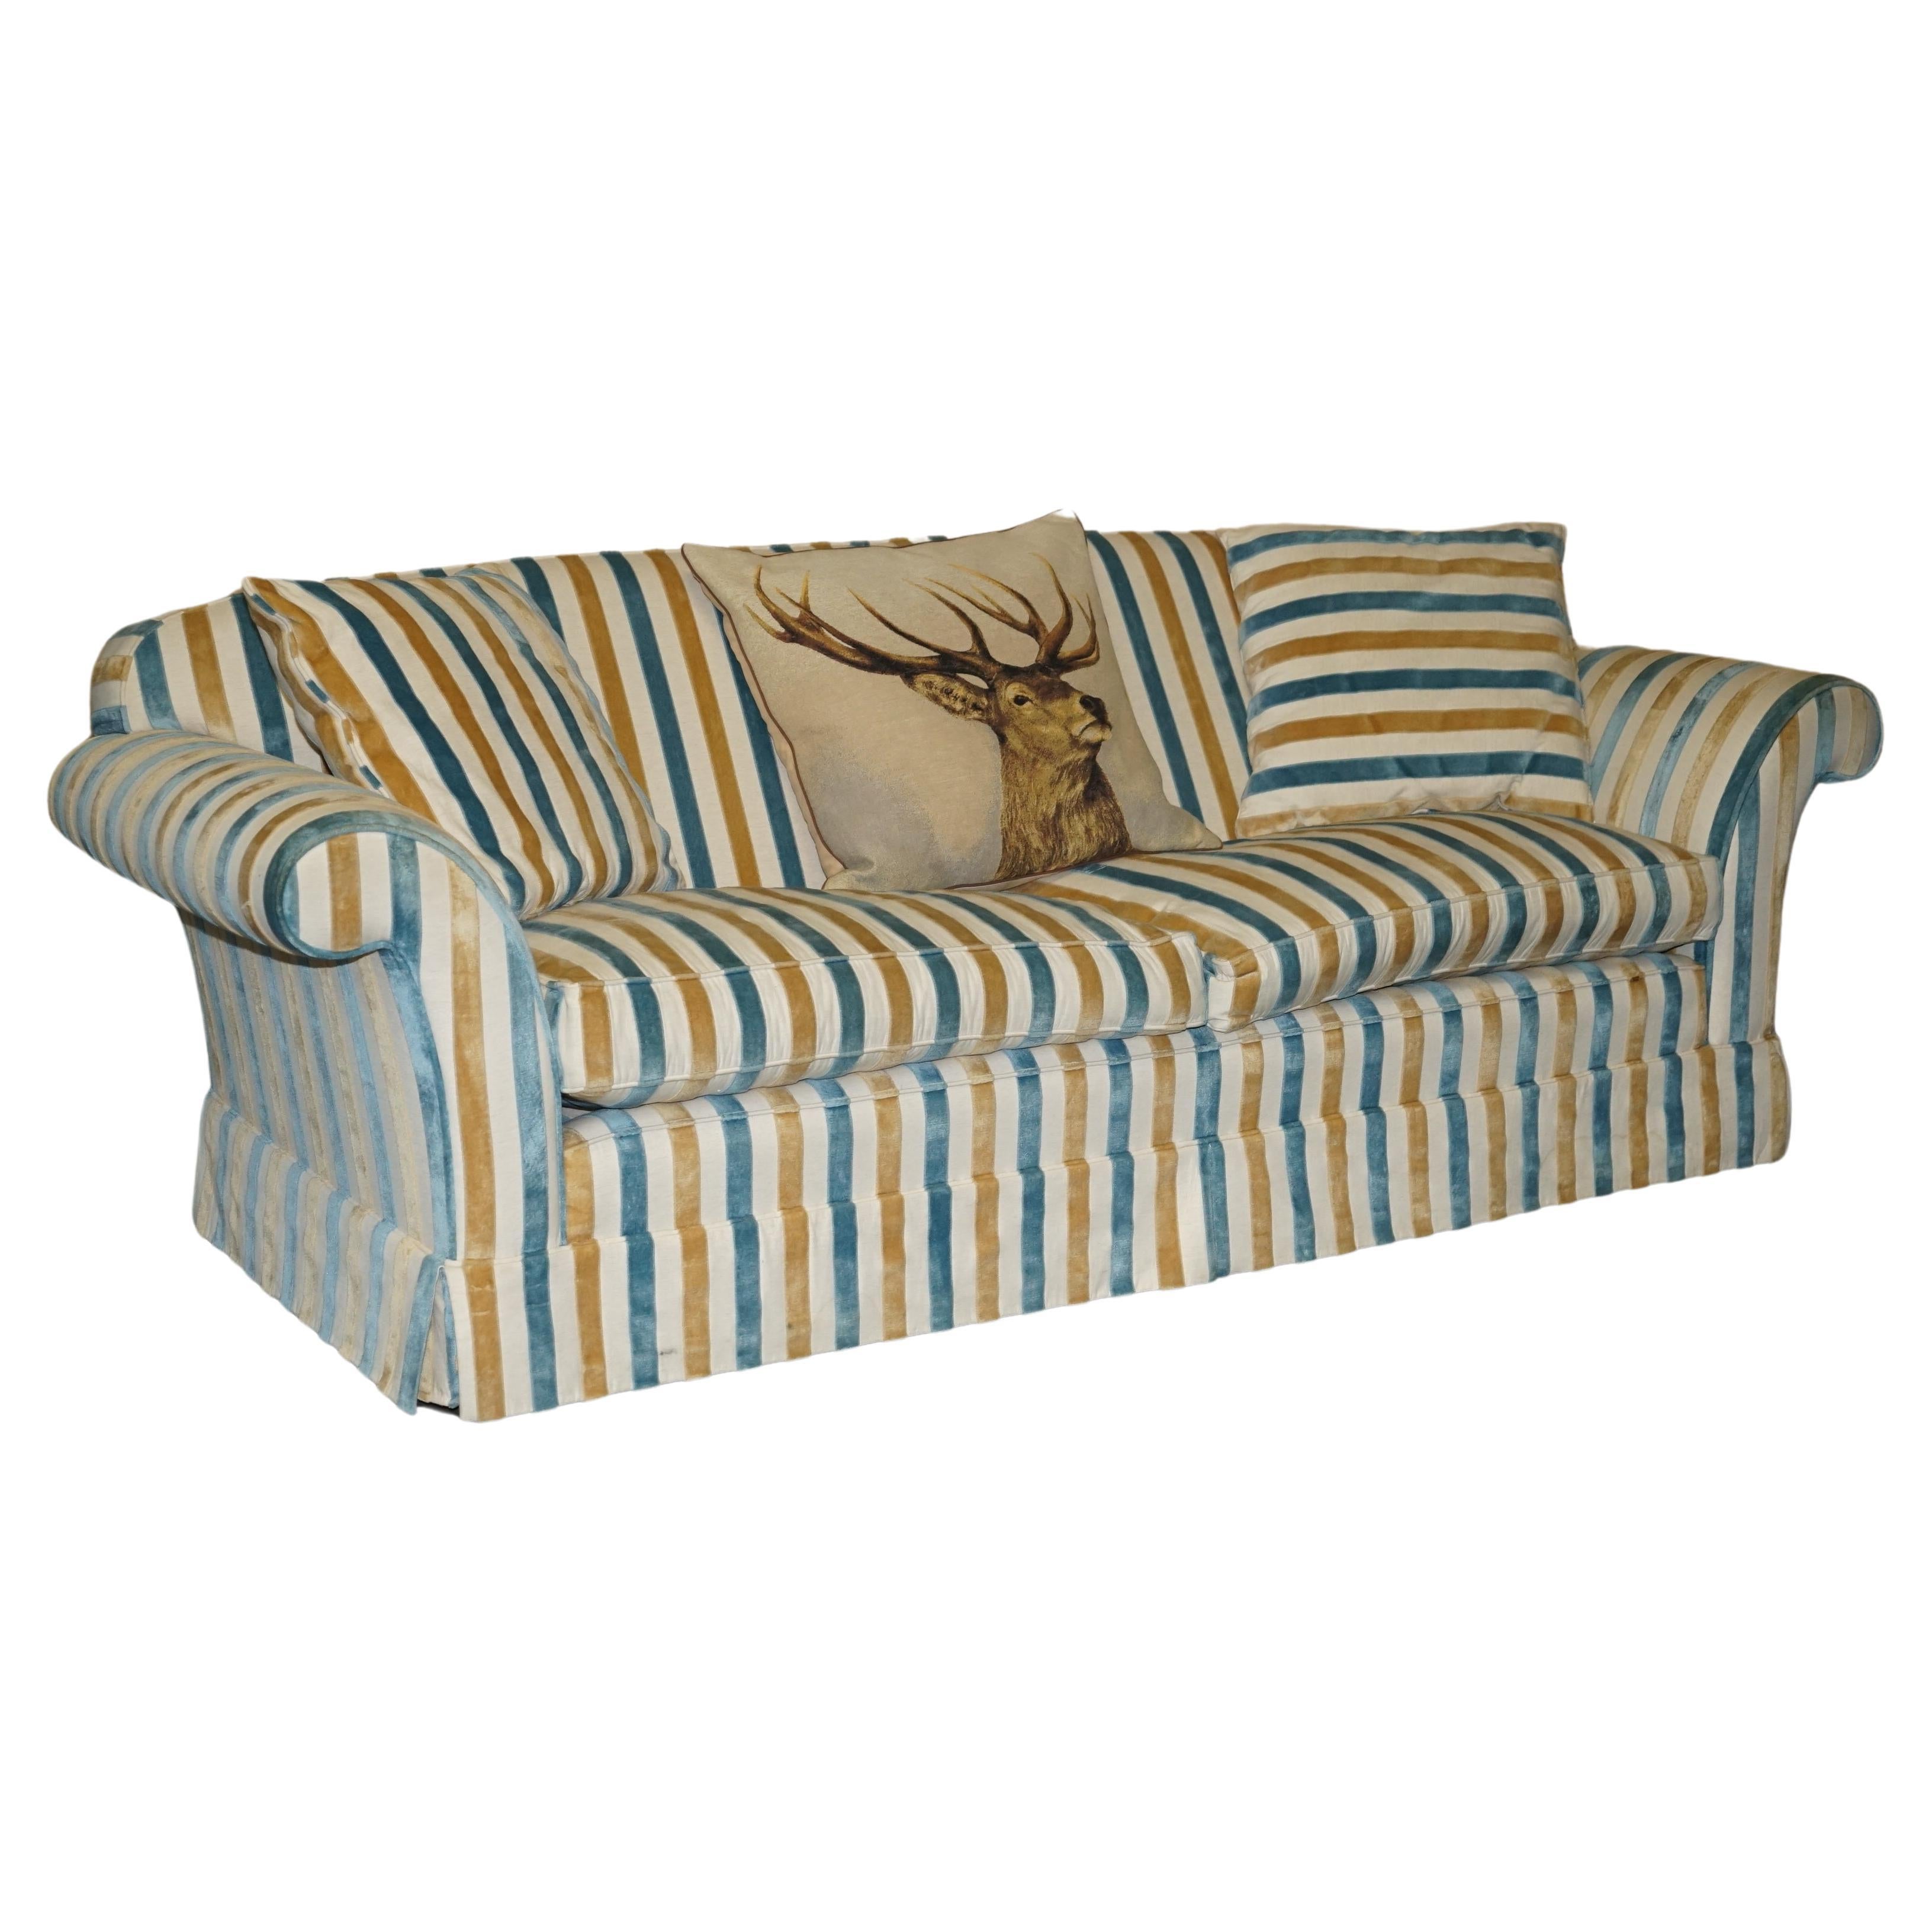 1 OF 2 STUNNING MULBERRY HOME DESIGNER CONTEMPORARY STRIPED THREE SEATER SOFAs For Sale